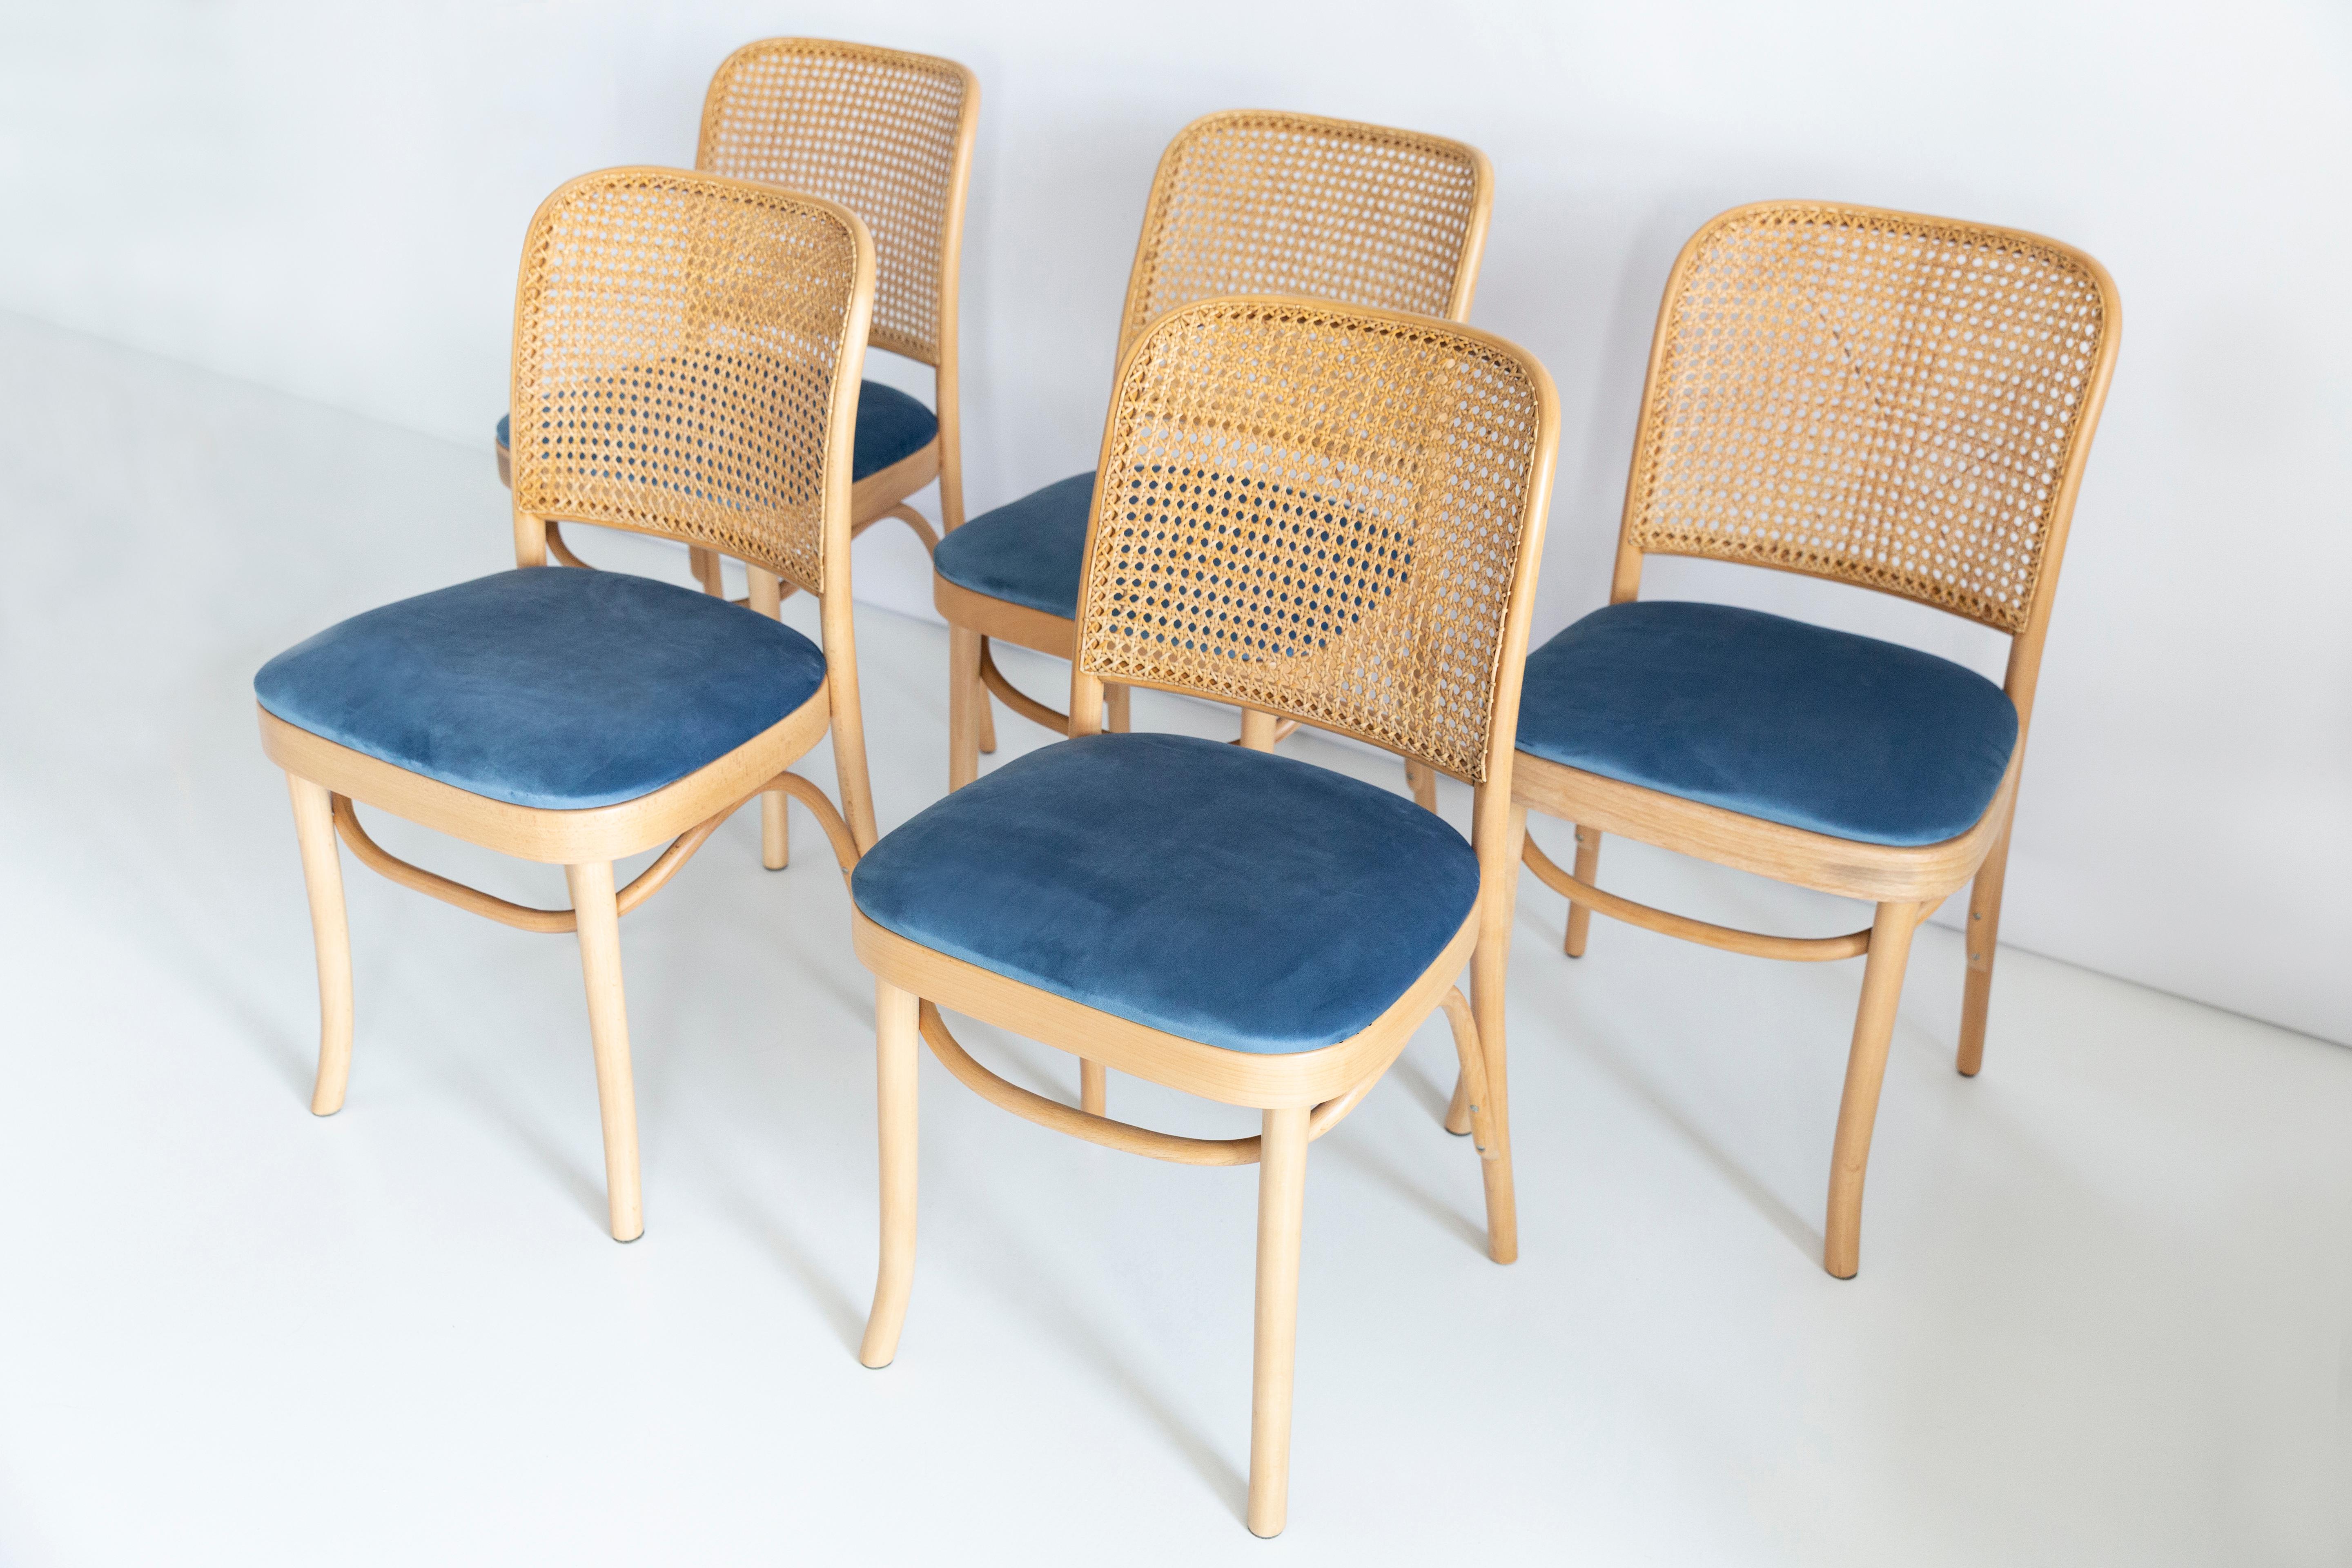 A set of 5 rattan and wood chairs. The furniture was designed by Helena and Jerzy Kurmanowicz. They were produced in Thonet Woodworking Factory and we thoroughly renovated them. The construction is made of beech wood dyed with water stain light